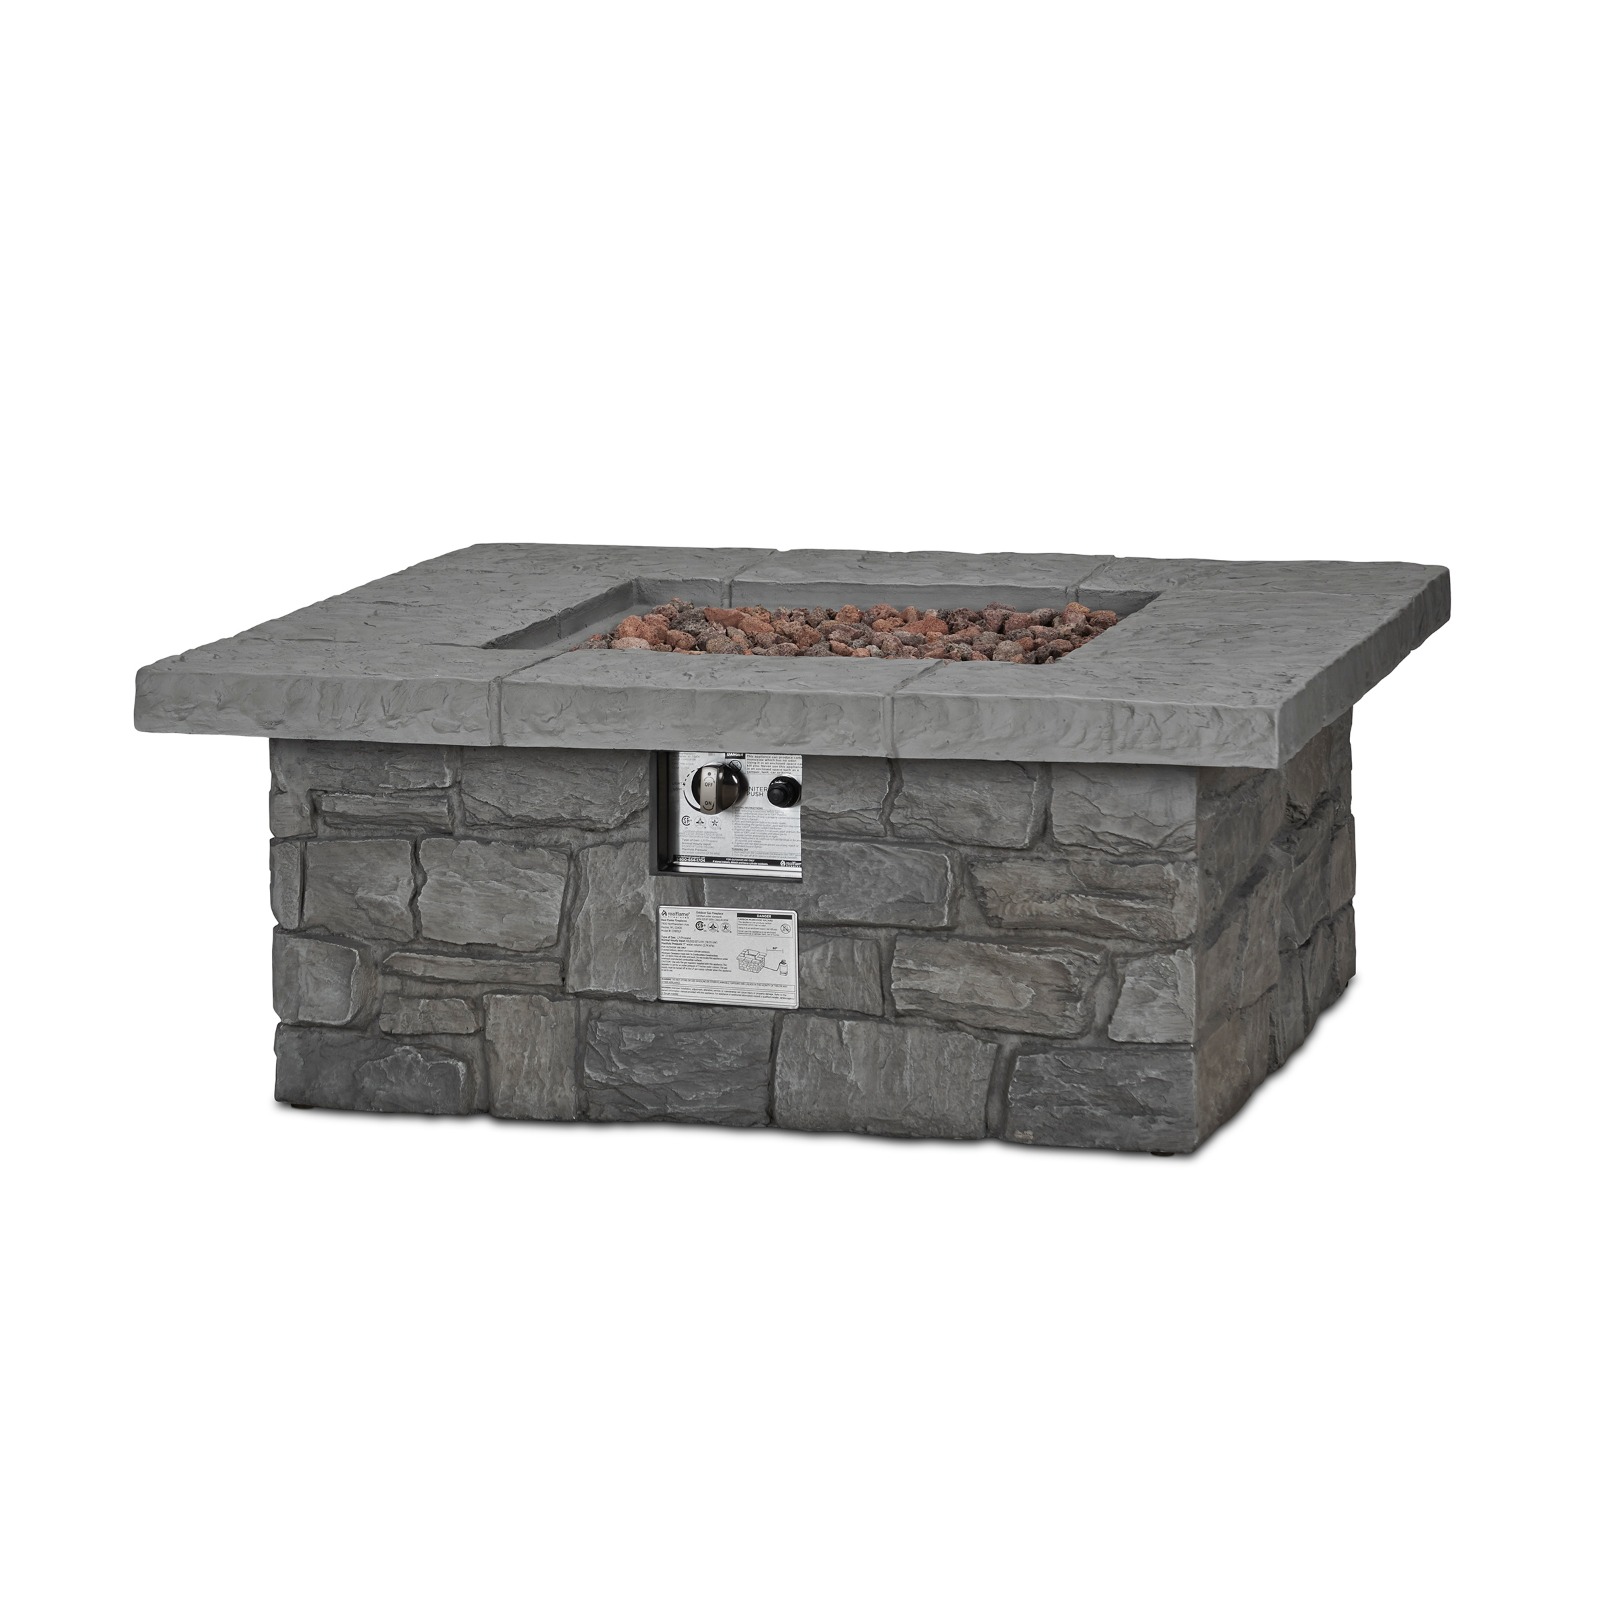 Sedona Square Propane Fire Table with NG Conversion Kit in gray back view